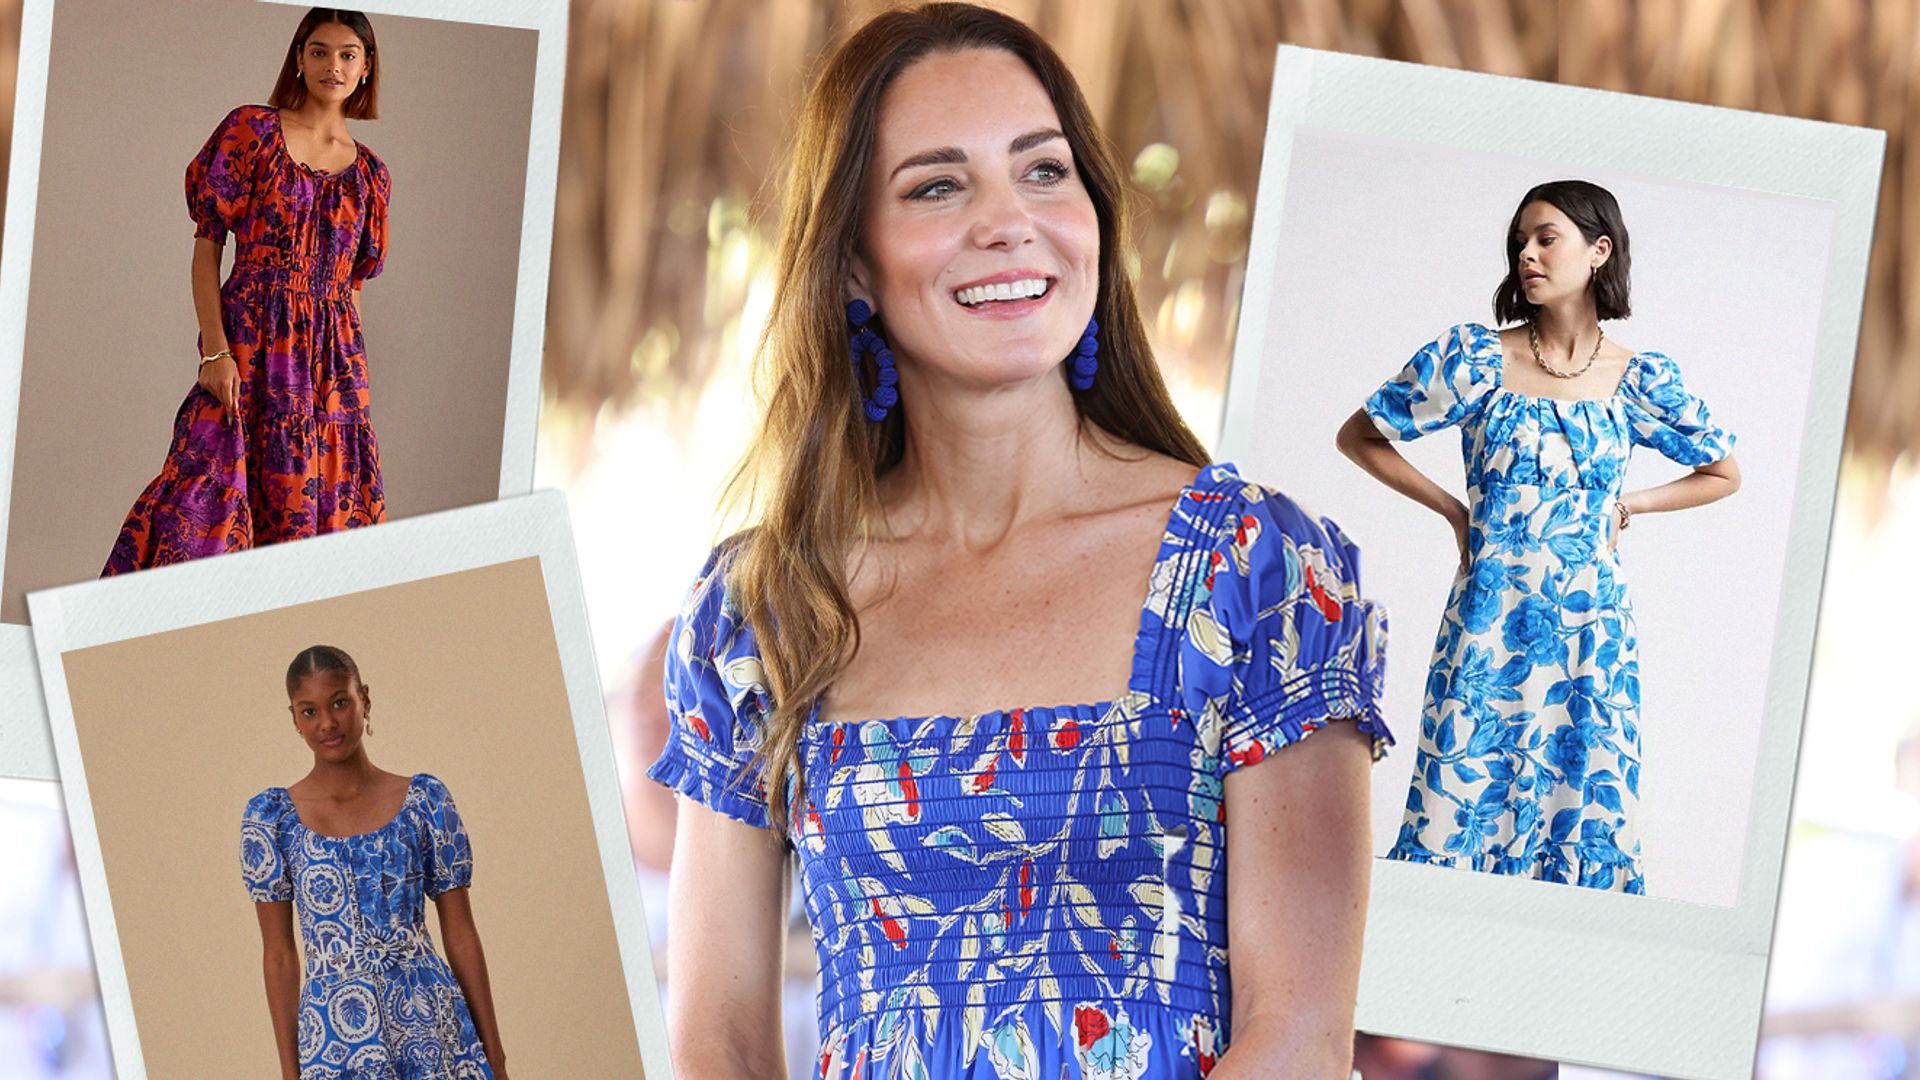 Loved Princess Kate's sold-out tropical floral dress? Me, too! So I went on the hunt for some lookalikes